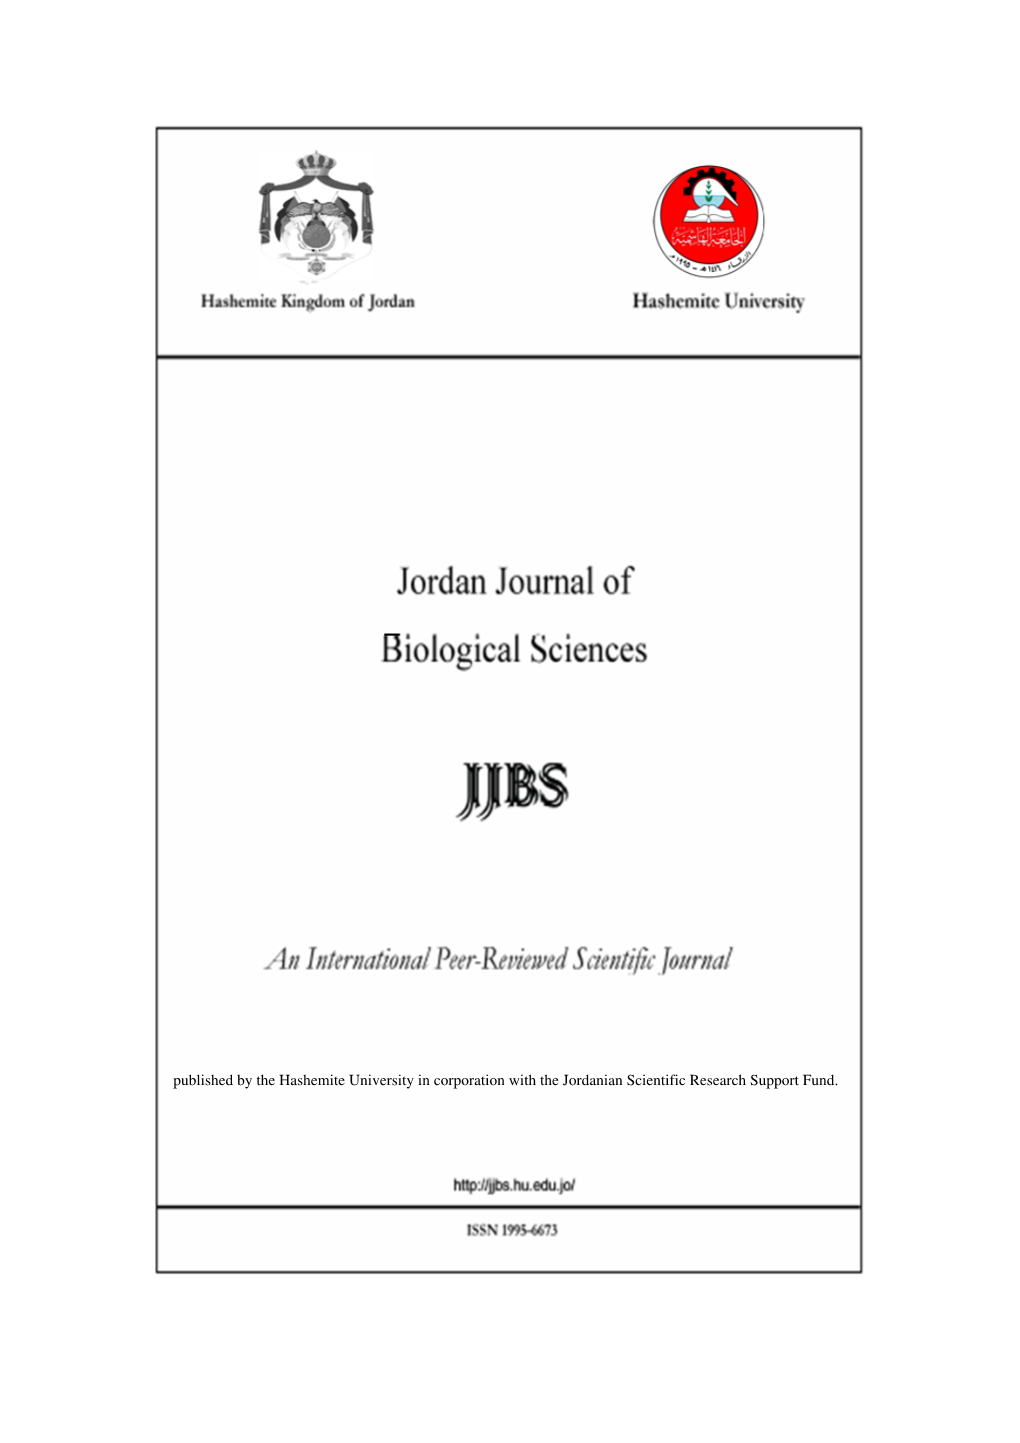 Published by the Hashemite University in Corporation with the Jordanian Scientific Research Support Fund